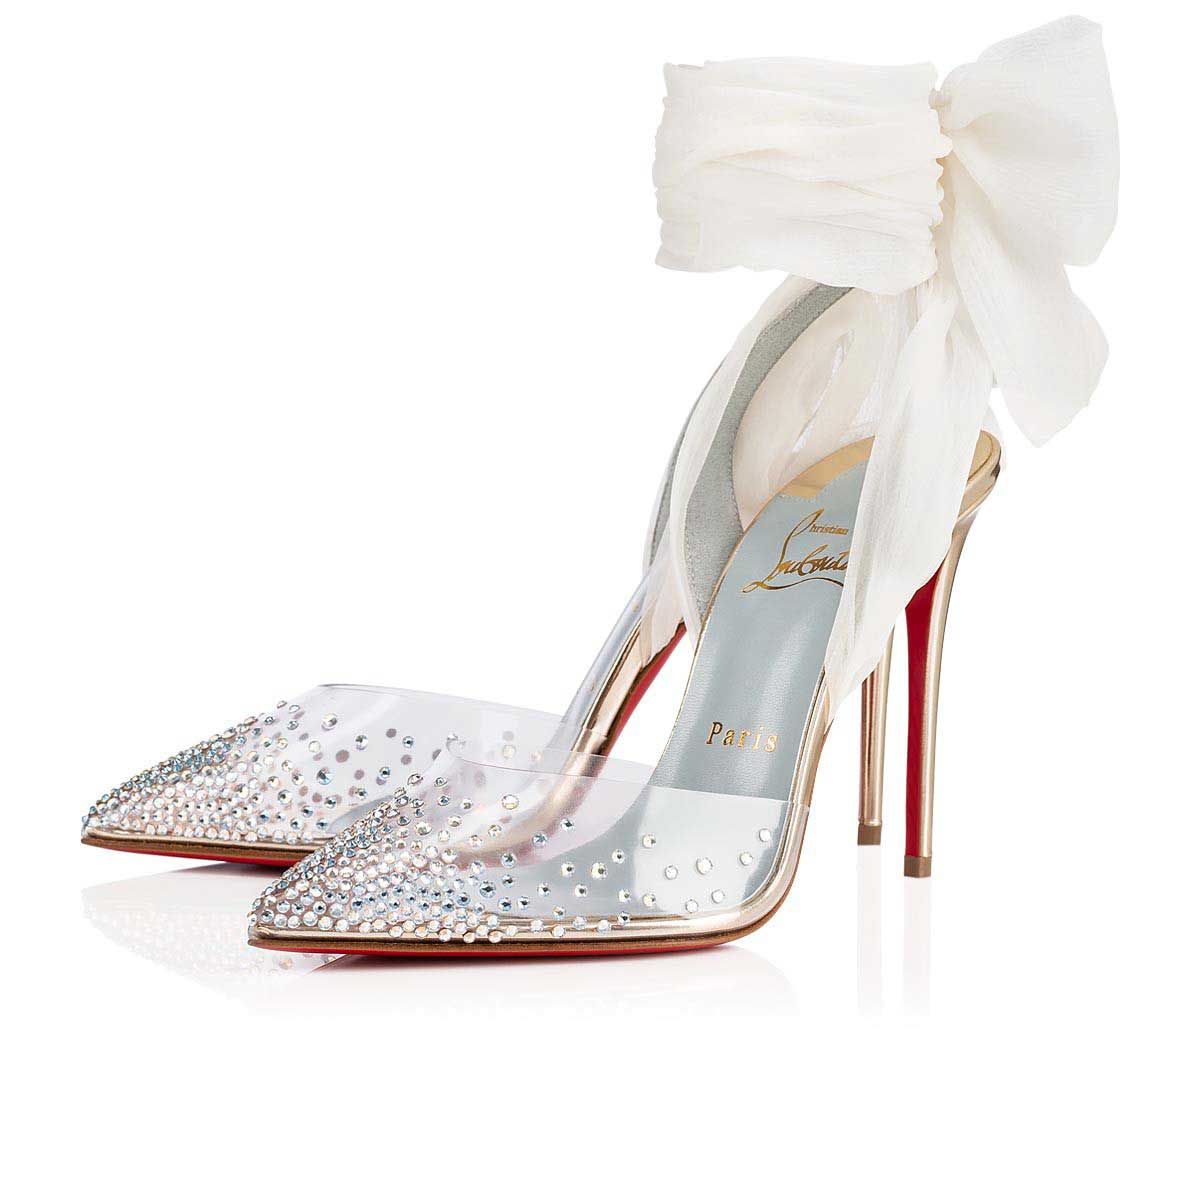 Team Triumphant: The Best Luxury Items From France Christian Louboutin